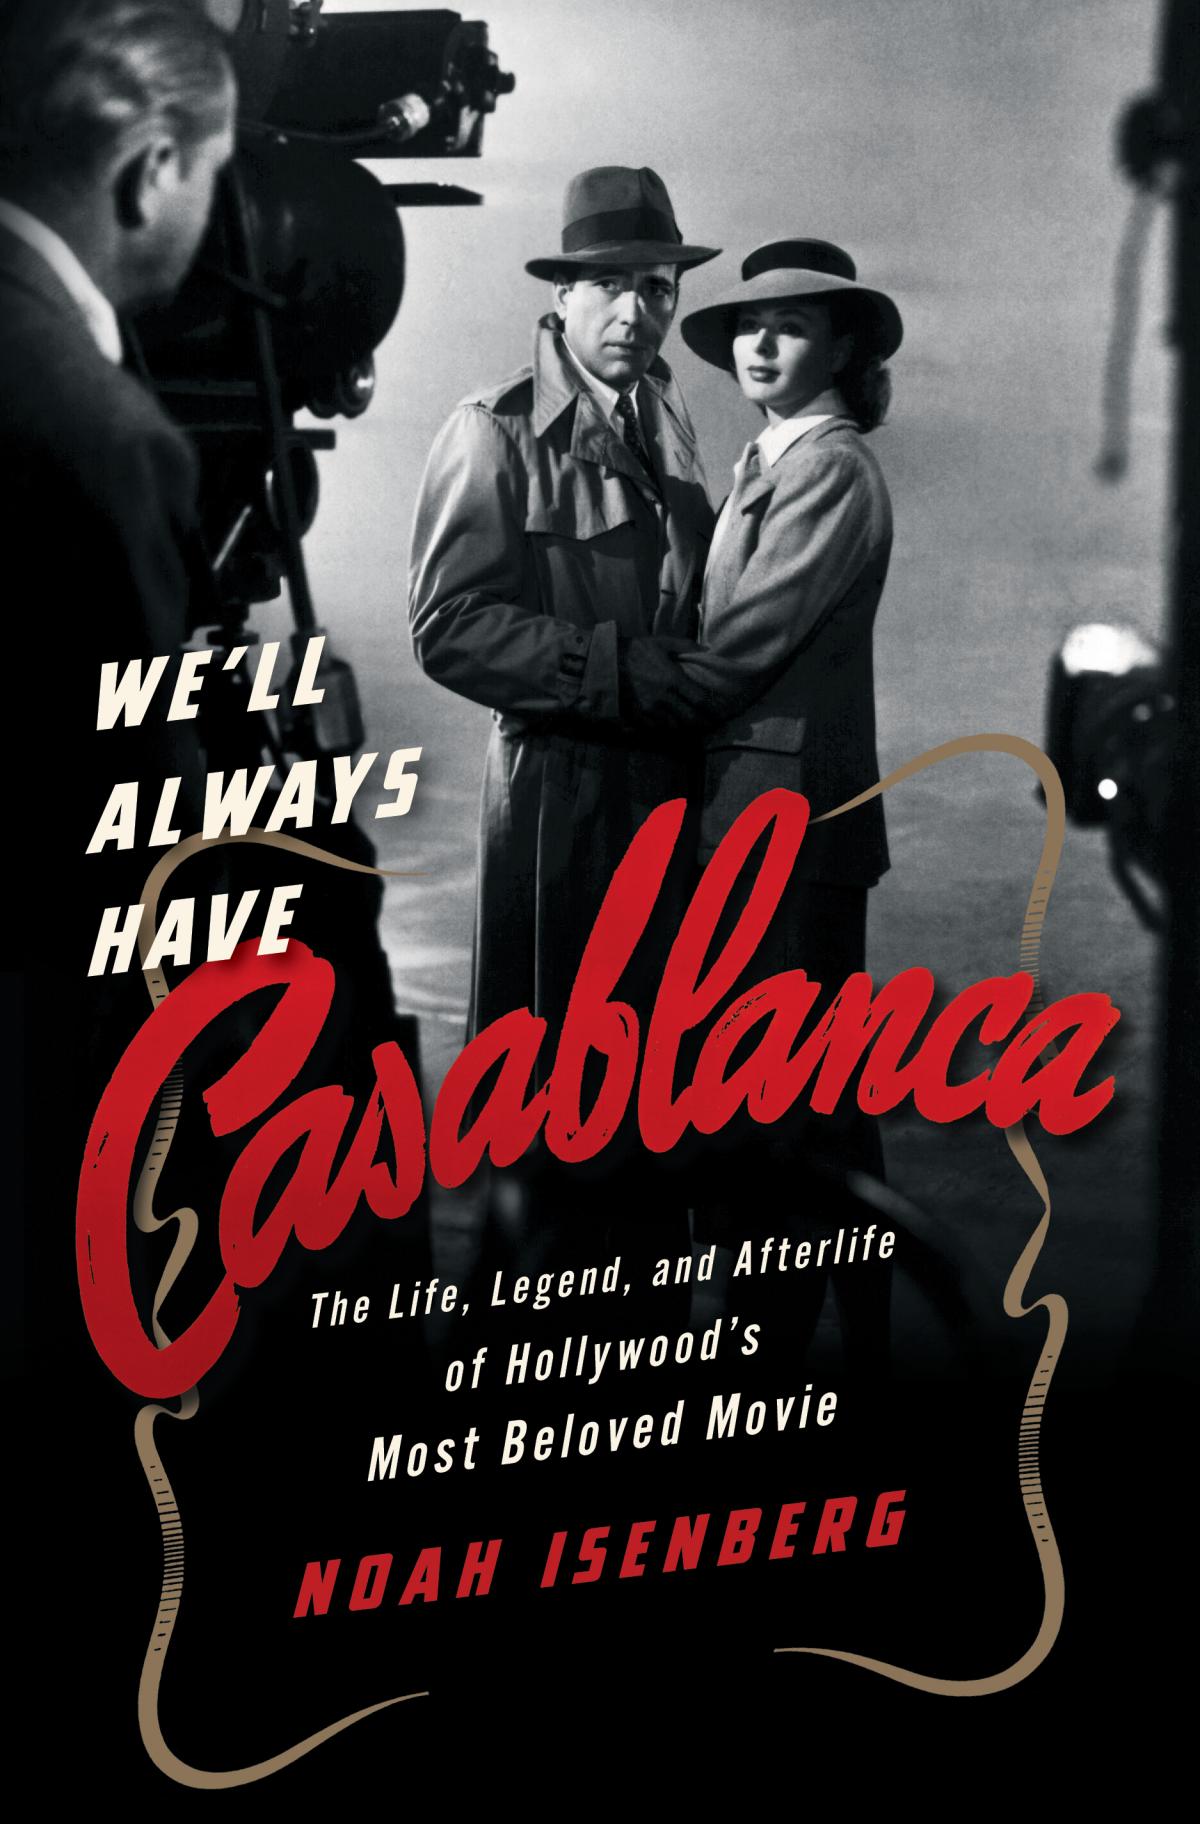 Cover of book "we'll always have Casablanca"